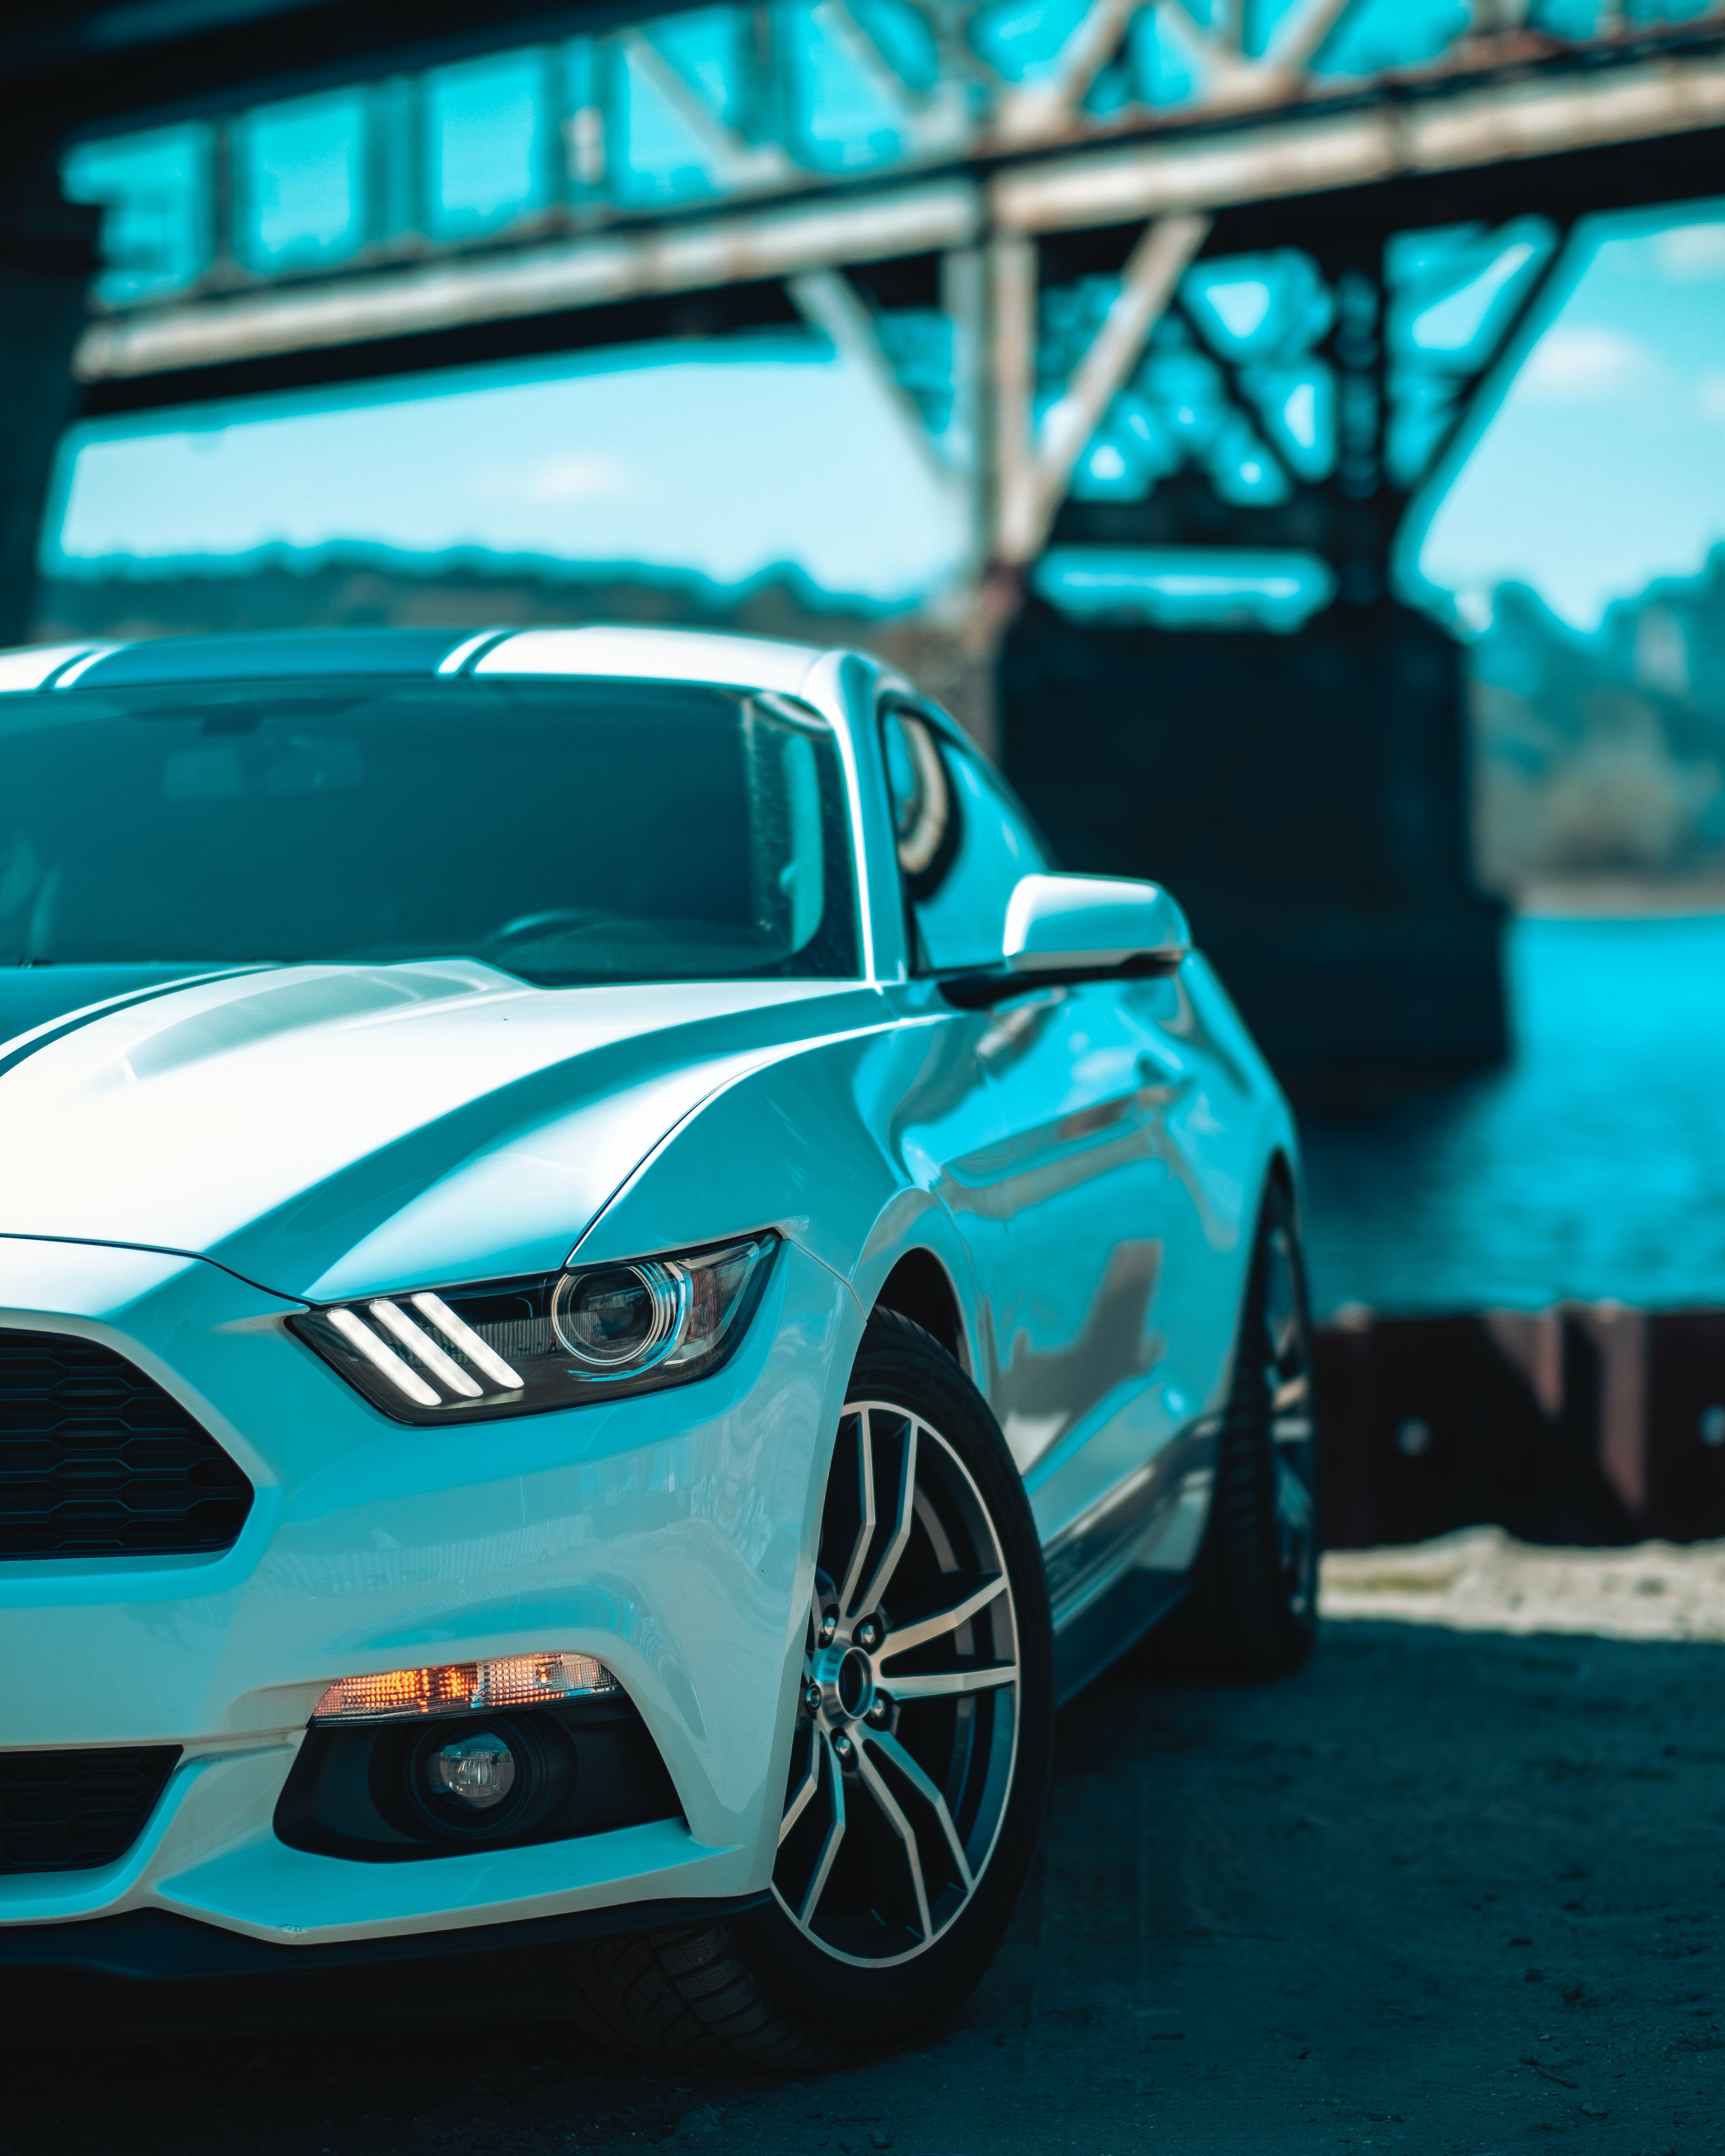 ford mustang, front view, headlight, cars, wheels